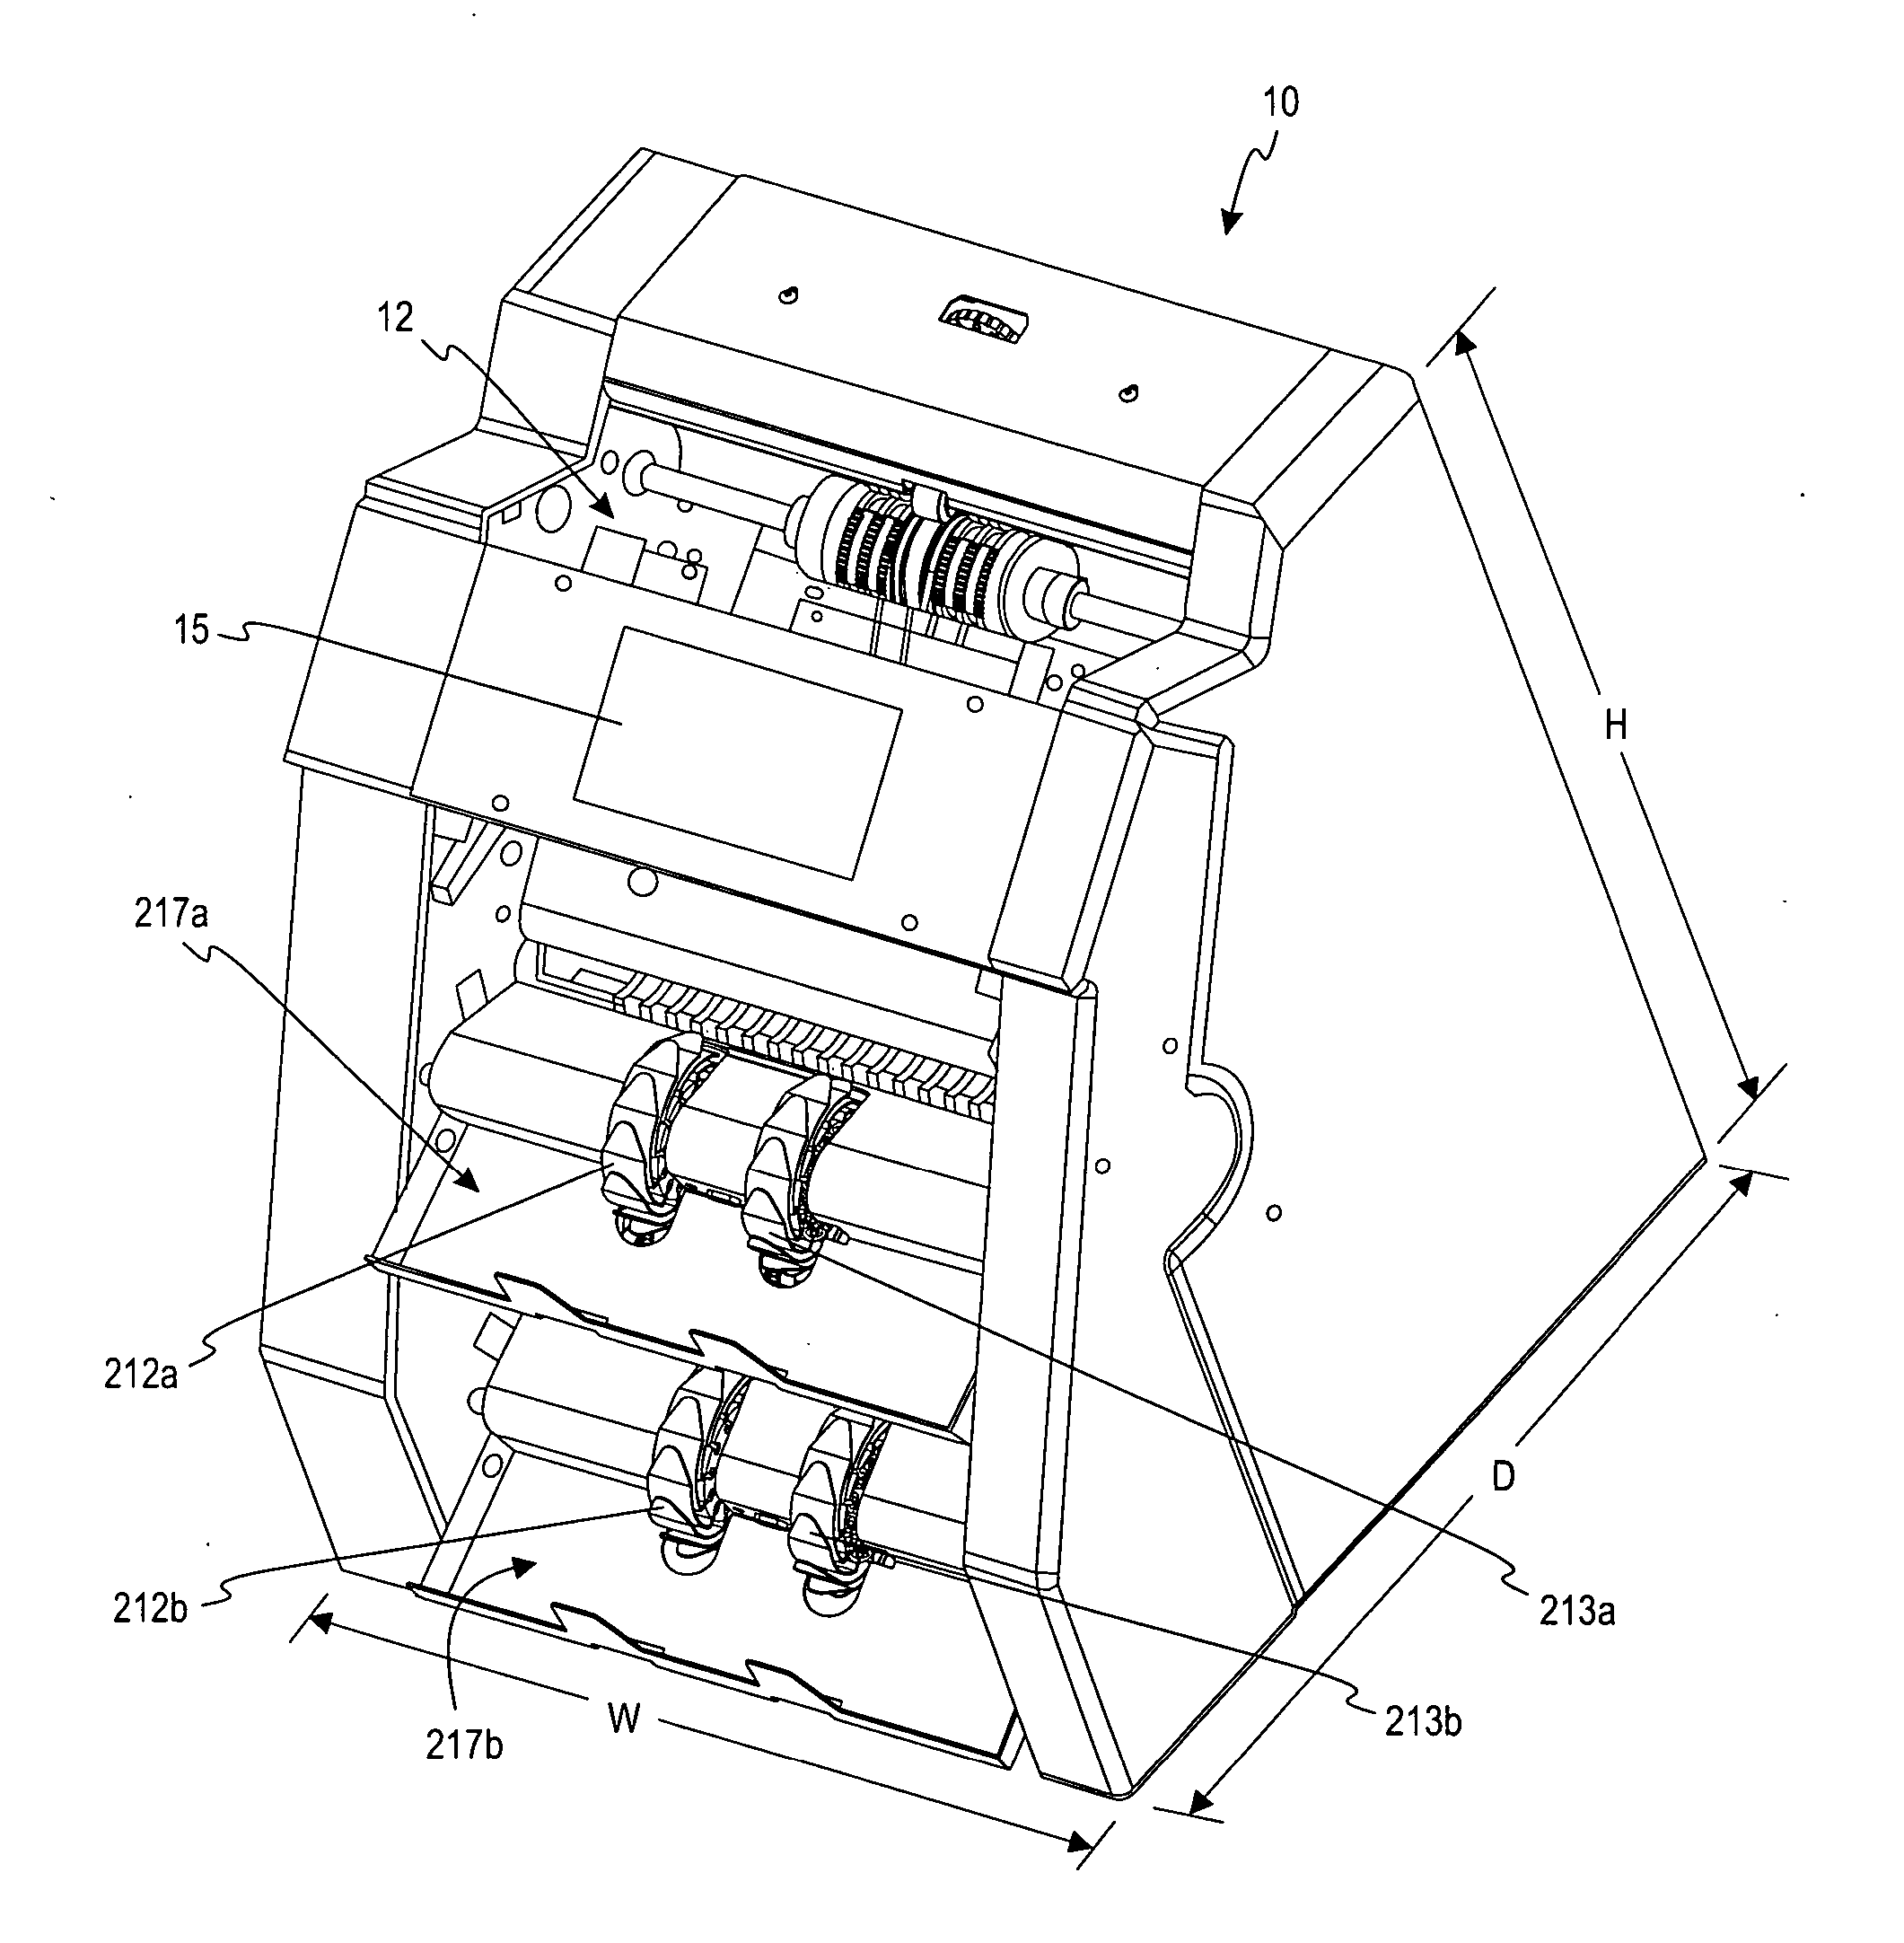 Currency processing device having a multiple stage transport path and method for operating the same